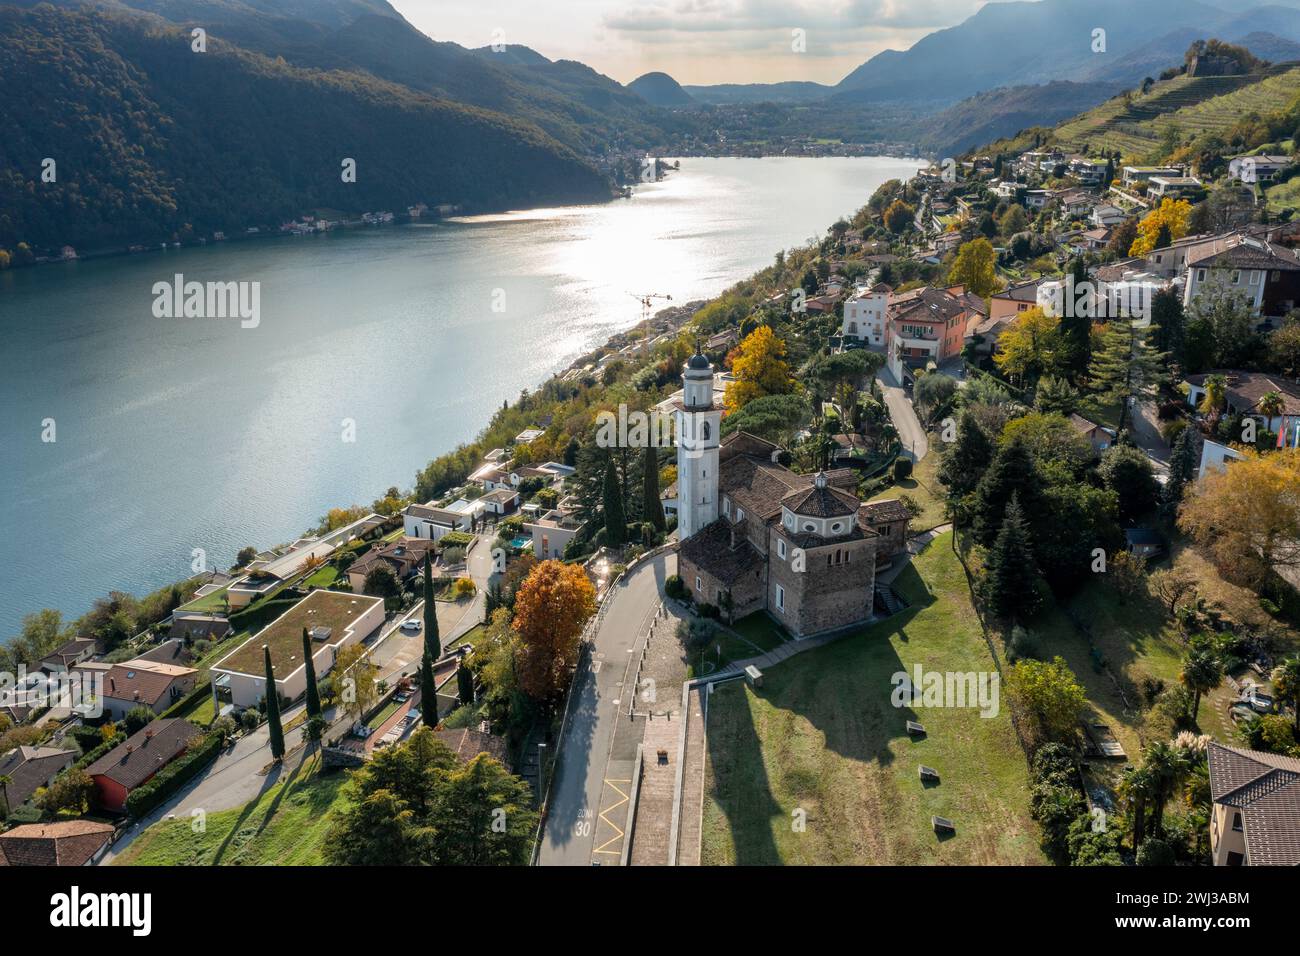 Drone view of Vico Morcote village and Lake Lugano in southern Switzerland Stock Photo